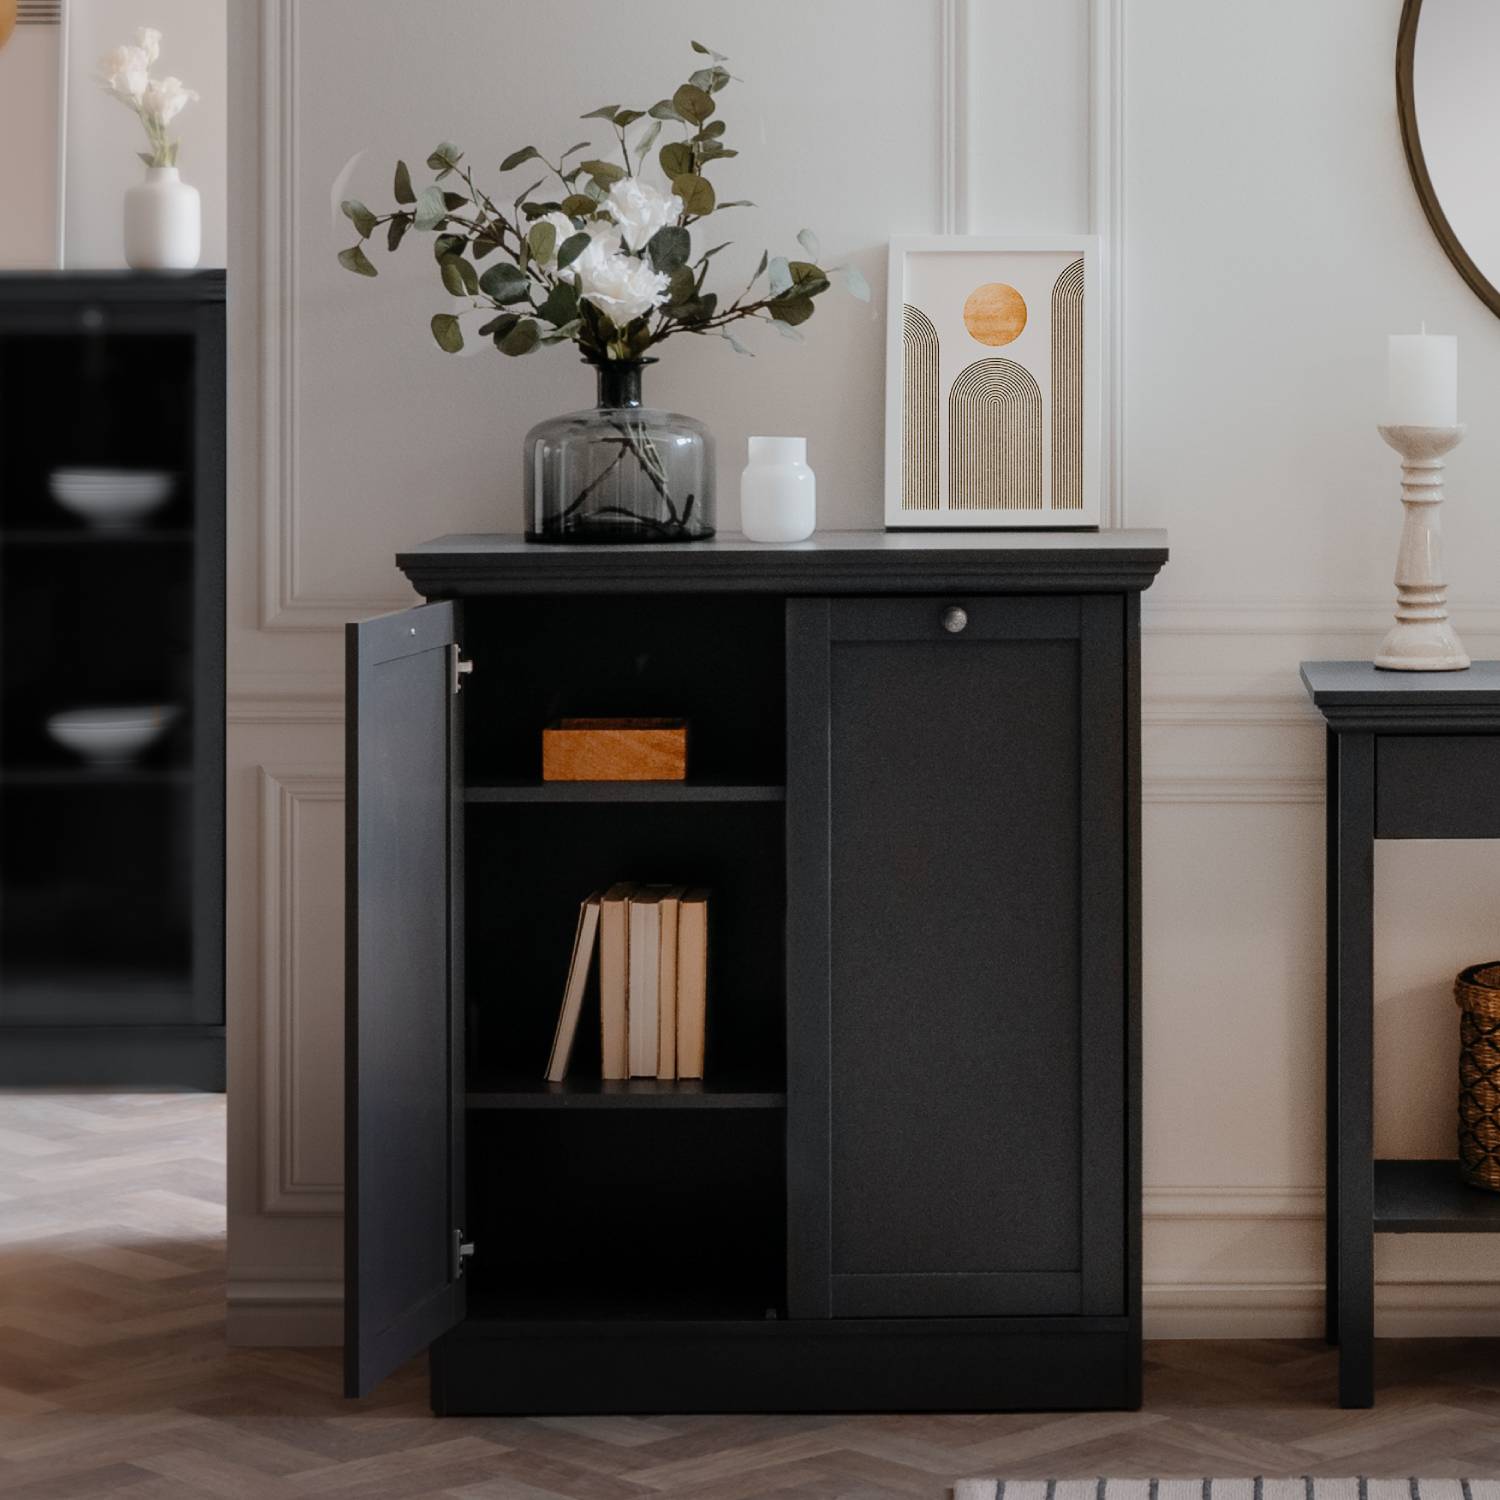 Sideboard Chest of Drawers Living Room Cupboard Cabinet Wood Anthracite